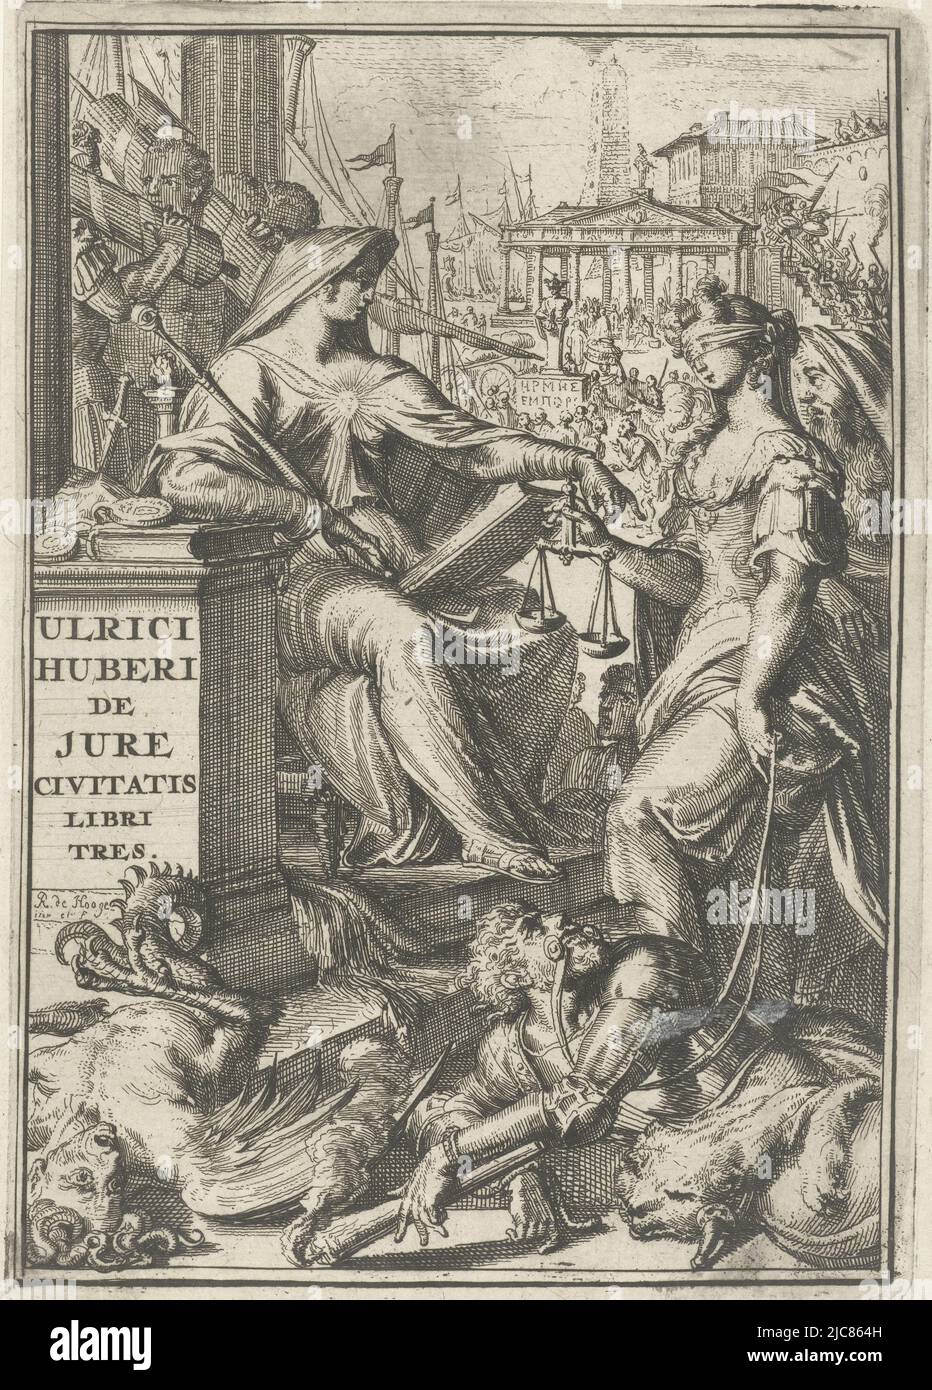 A woman with a heart on her chest, a scepter in one hand and a book in the other (Truth) sits on a throne. Opposite her is a blindfolded woman holding a scale (Justice). On the ground several figures symbolizing evil things. Title print for 'De jure civitatis, libri tres' by Ulricus Huber Ulrici Huberi De jure civitatis libri tres , print maker: Romeyn de Hooghe, (mentioned on object), Romeyn de Hooghe, (mentioned on object), Haarlem, 1694, paper, etching, h 182 mm × w 127 mm Stock Photo